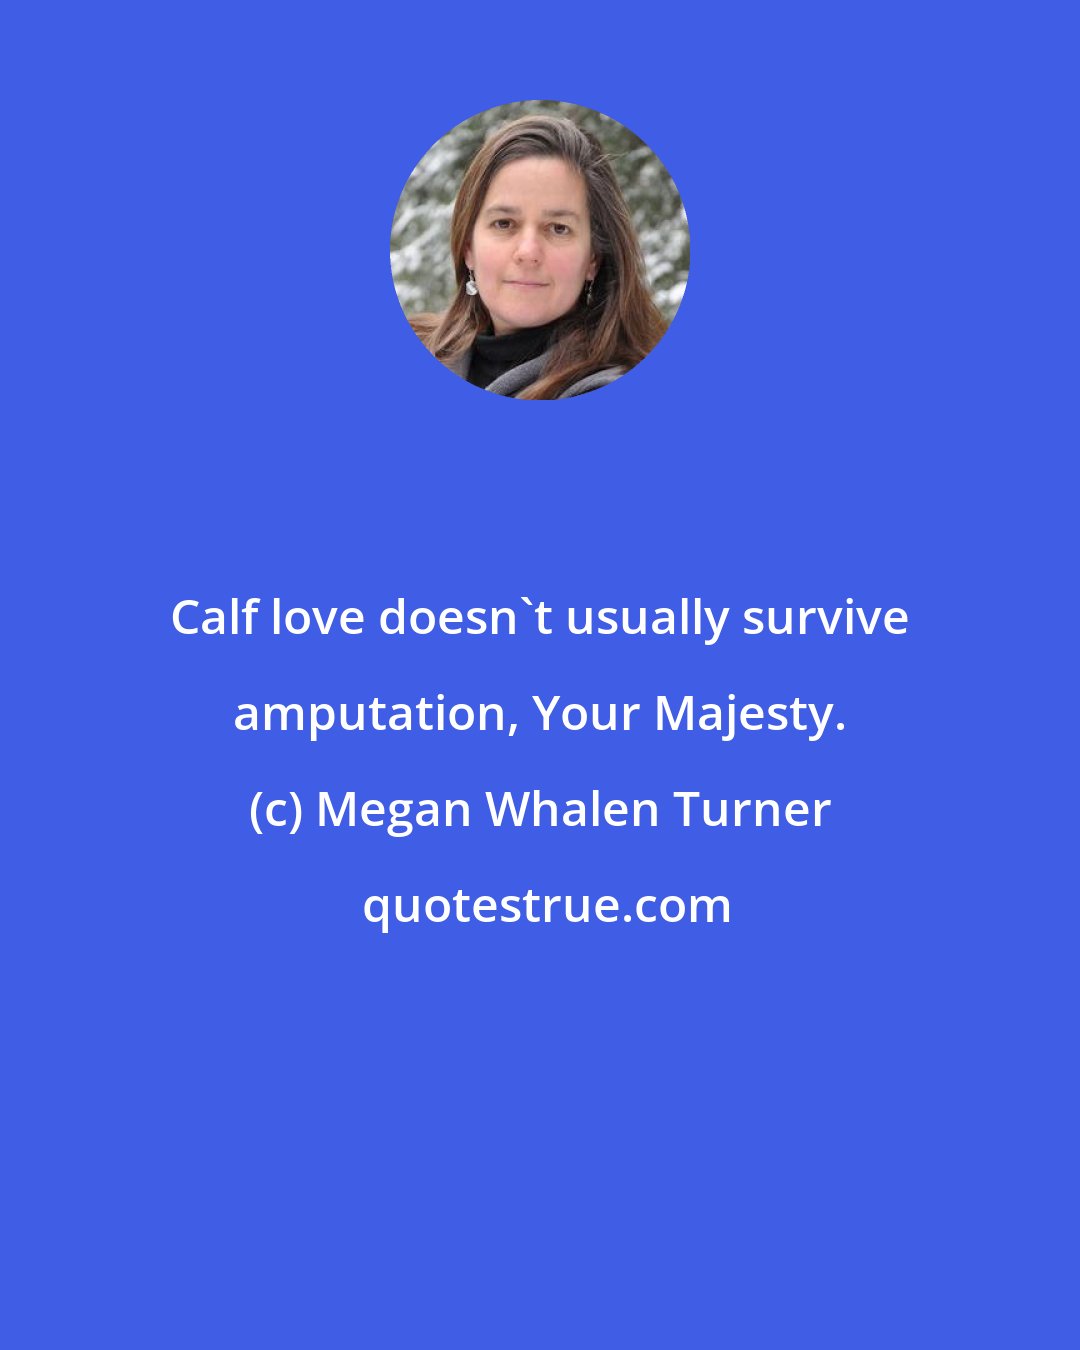 Megan Whalen Turner: Calf love doesn't usually survive amputation, Your Majesty.